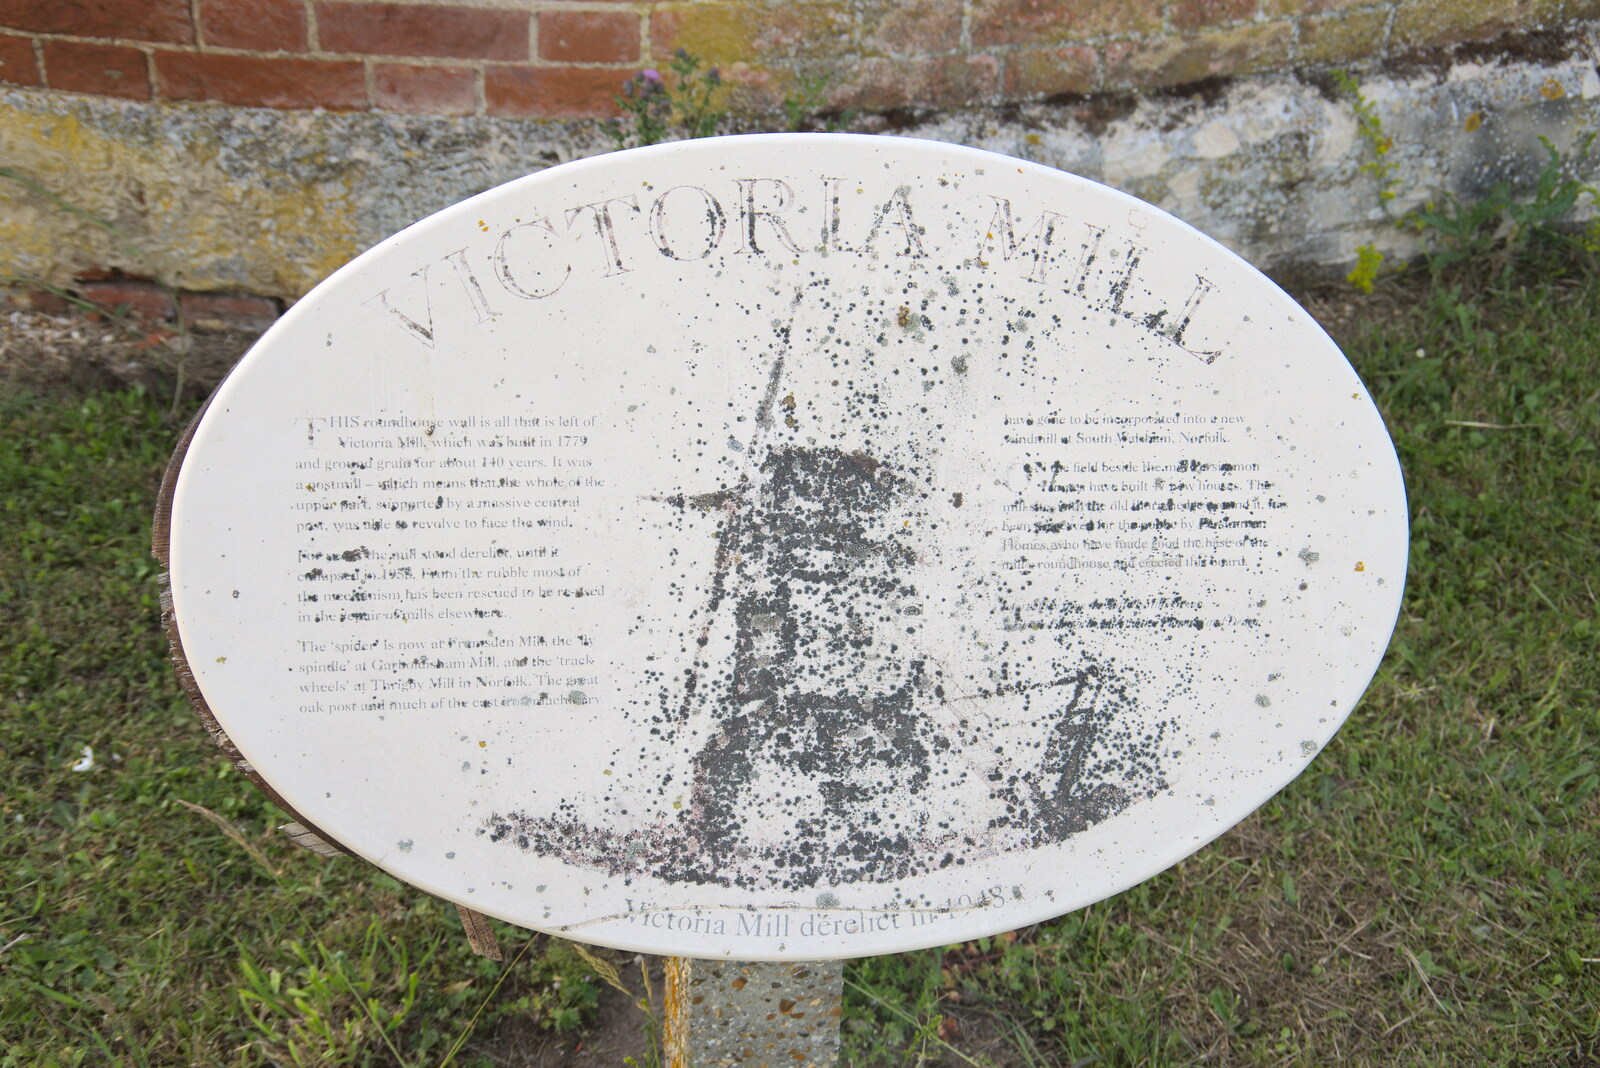 The Victoria Mill sign has seen better days from The BSCC at Earl Soham and at Colin and Jill's, Eye, Suffolk - 26th June 2021